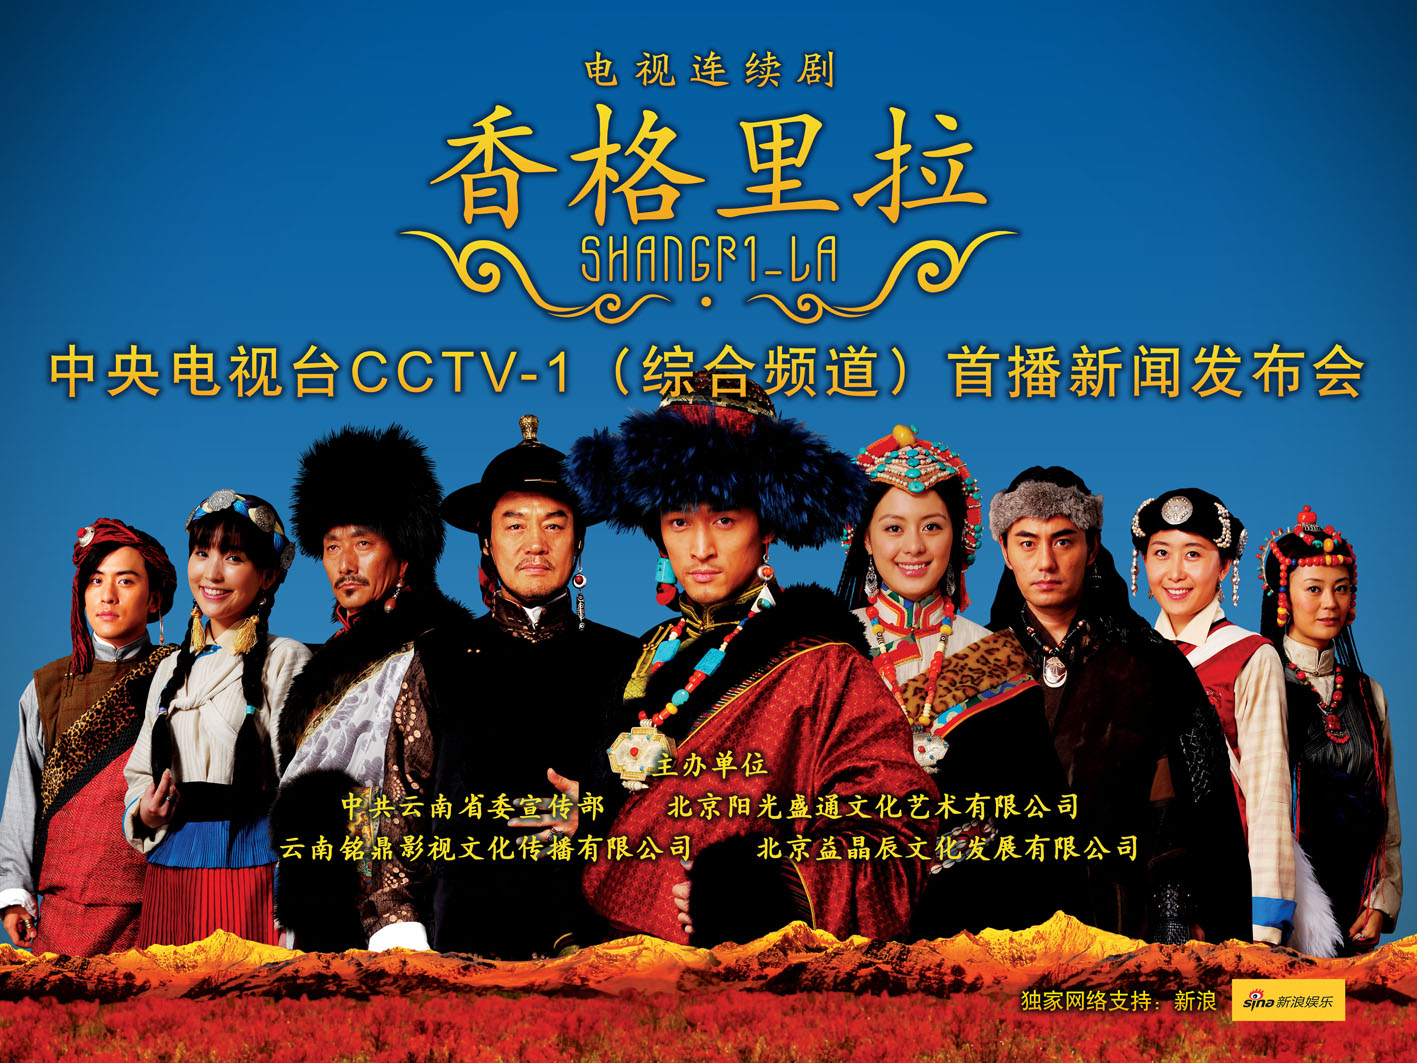 The press conference announced that the new TV series "Shangri-la" is to be broadcast through CCTV Channel 1 every evening from May 6, 2011, on May 4, 2011. [Photo/ Shangri-la]